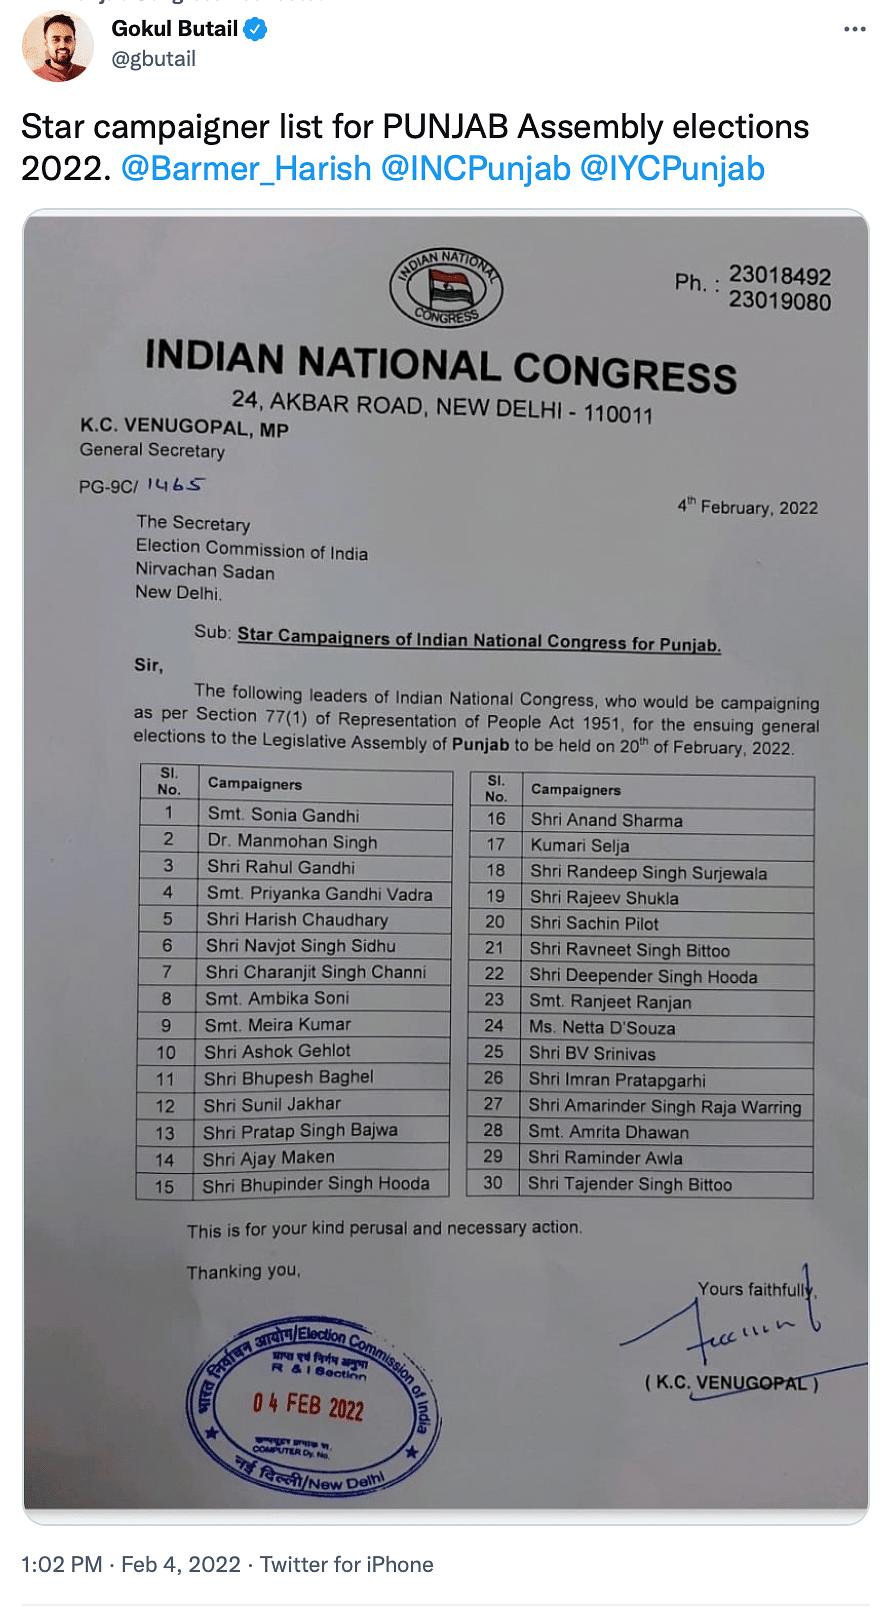 Manish Tewari said that he would've been surprised if his name was in the list.